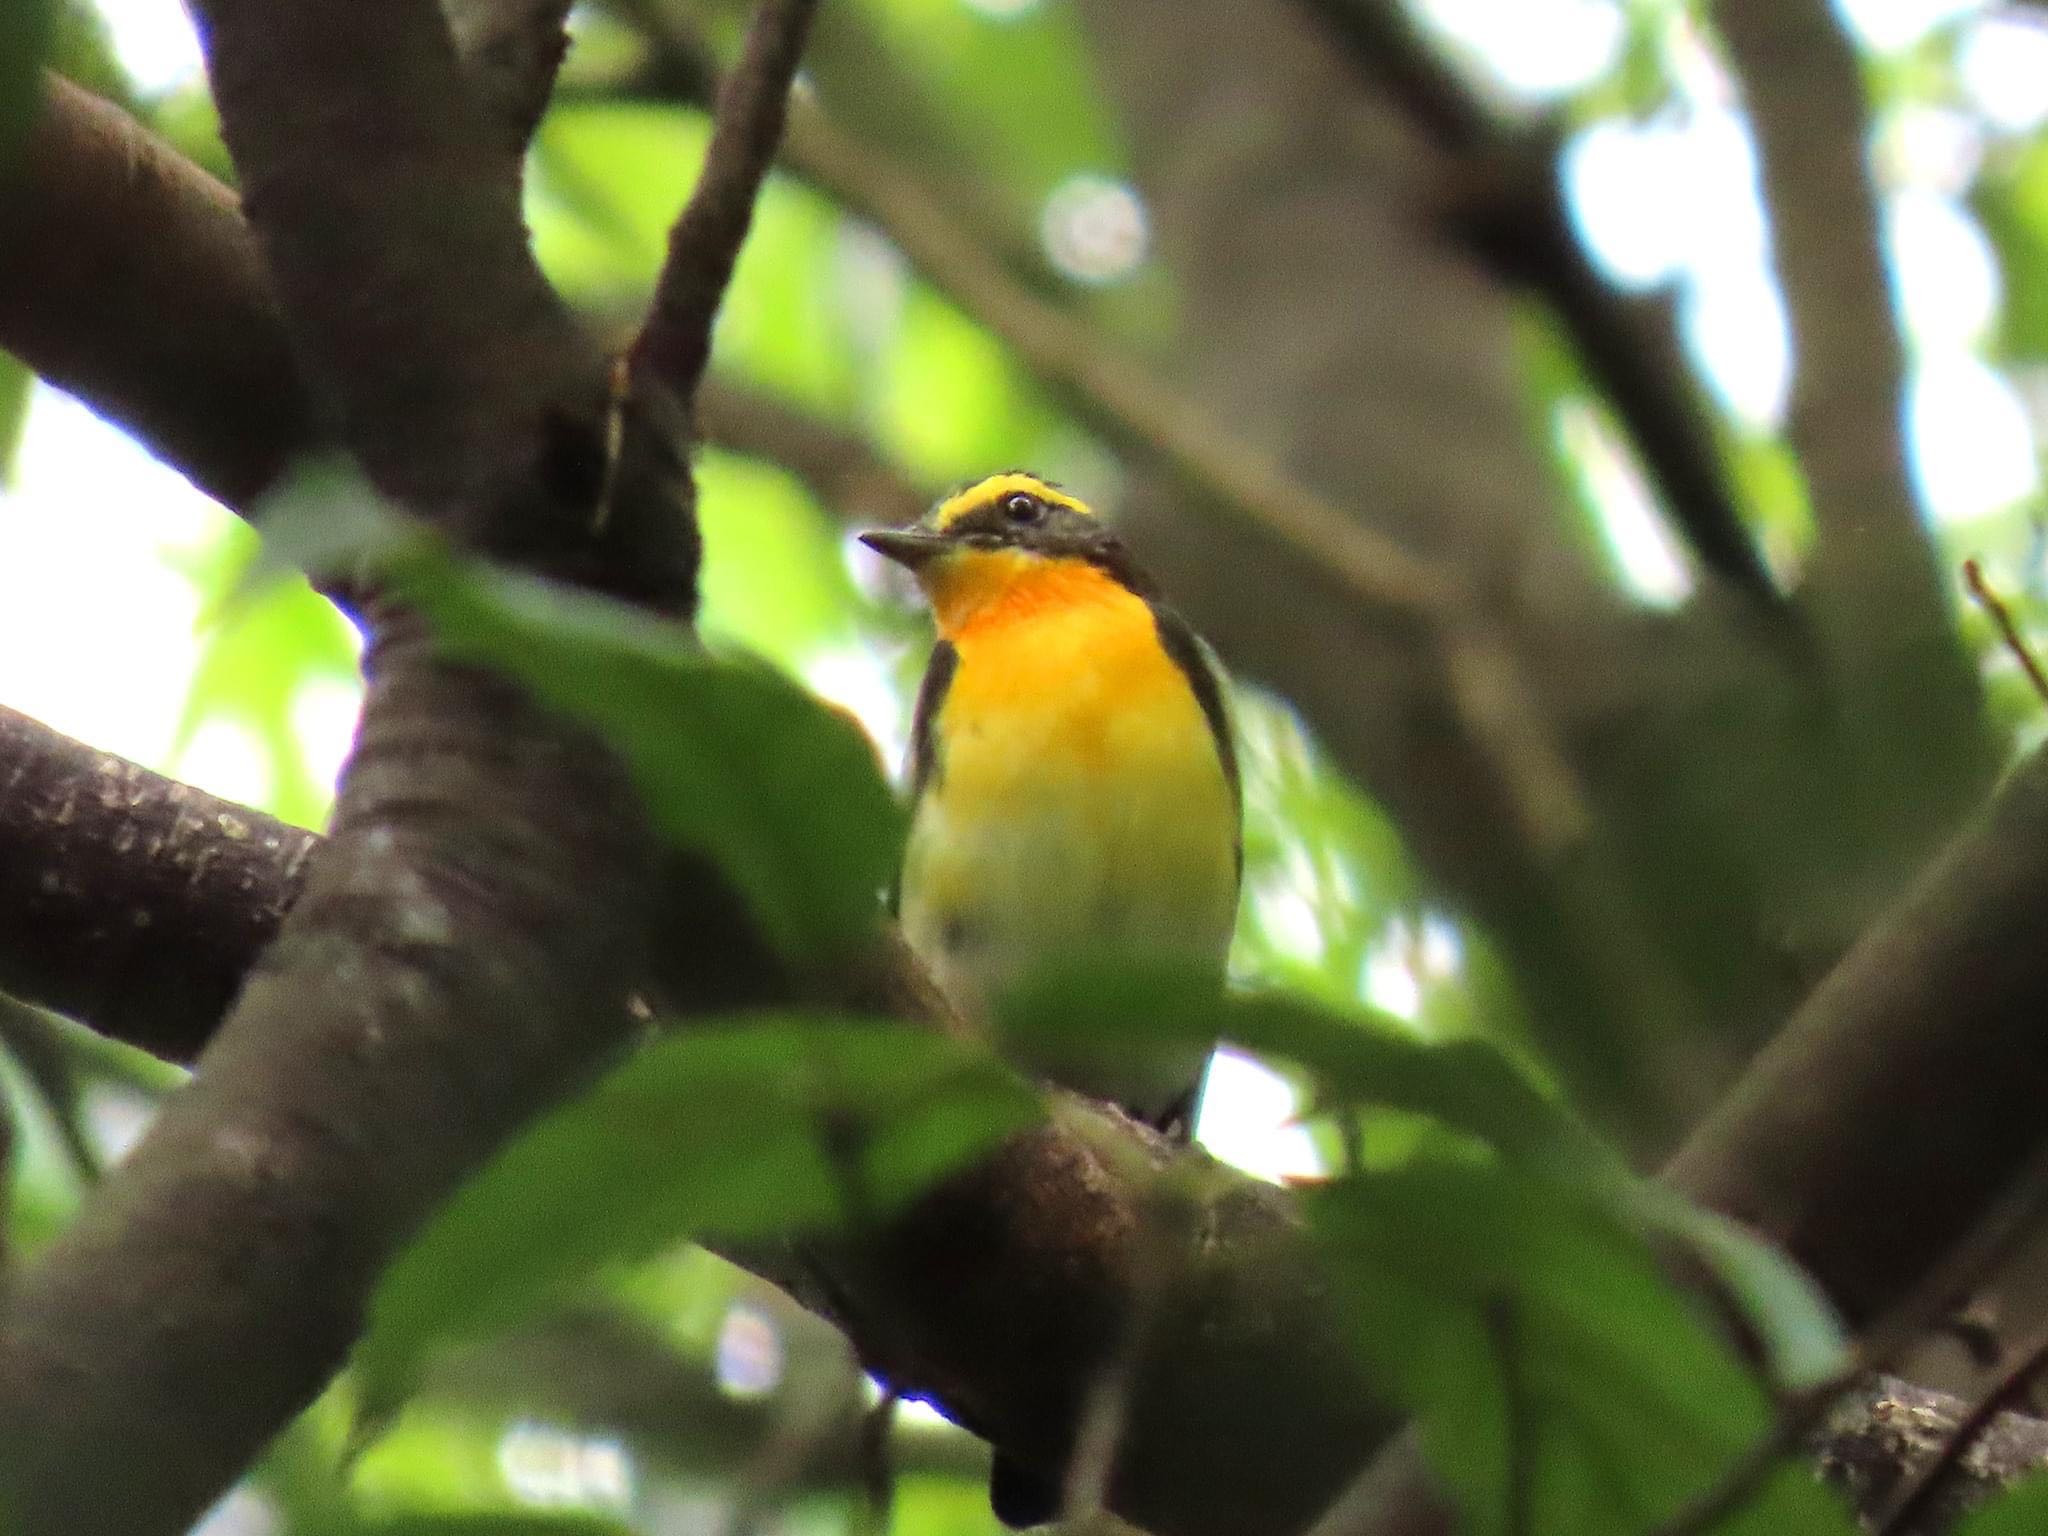 Photo of Narcissus Flycatcher at Osaka castle park by えりにゃん店長